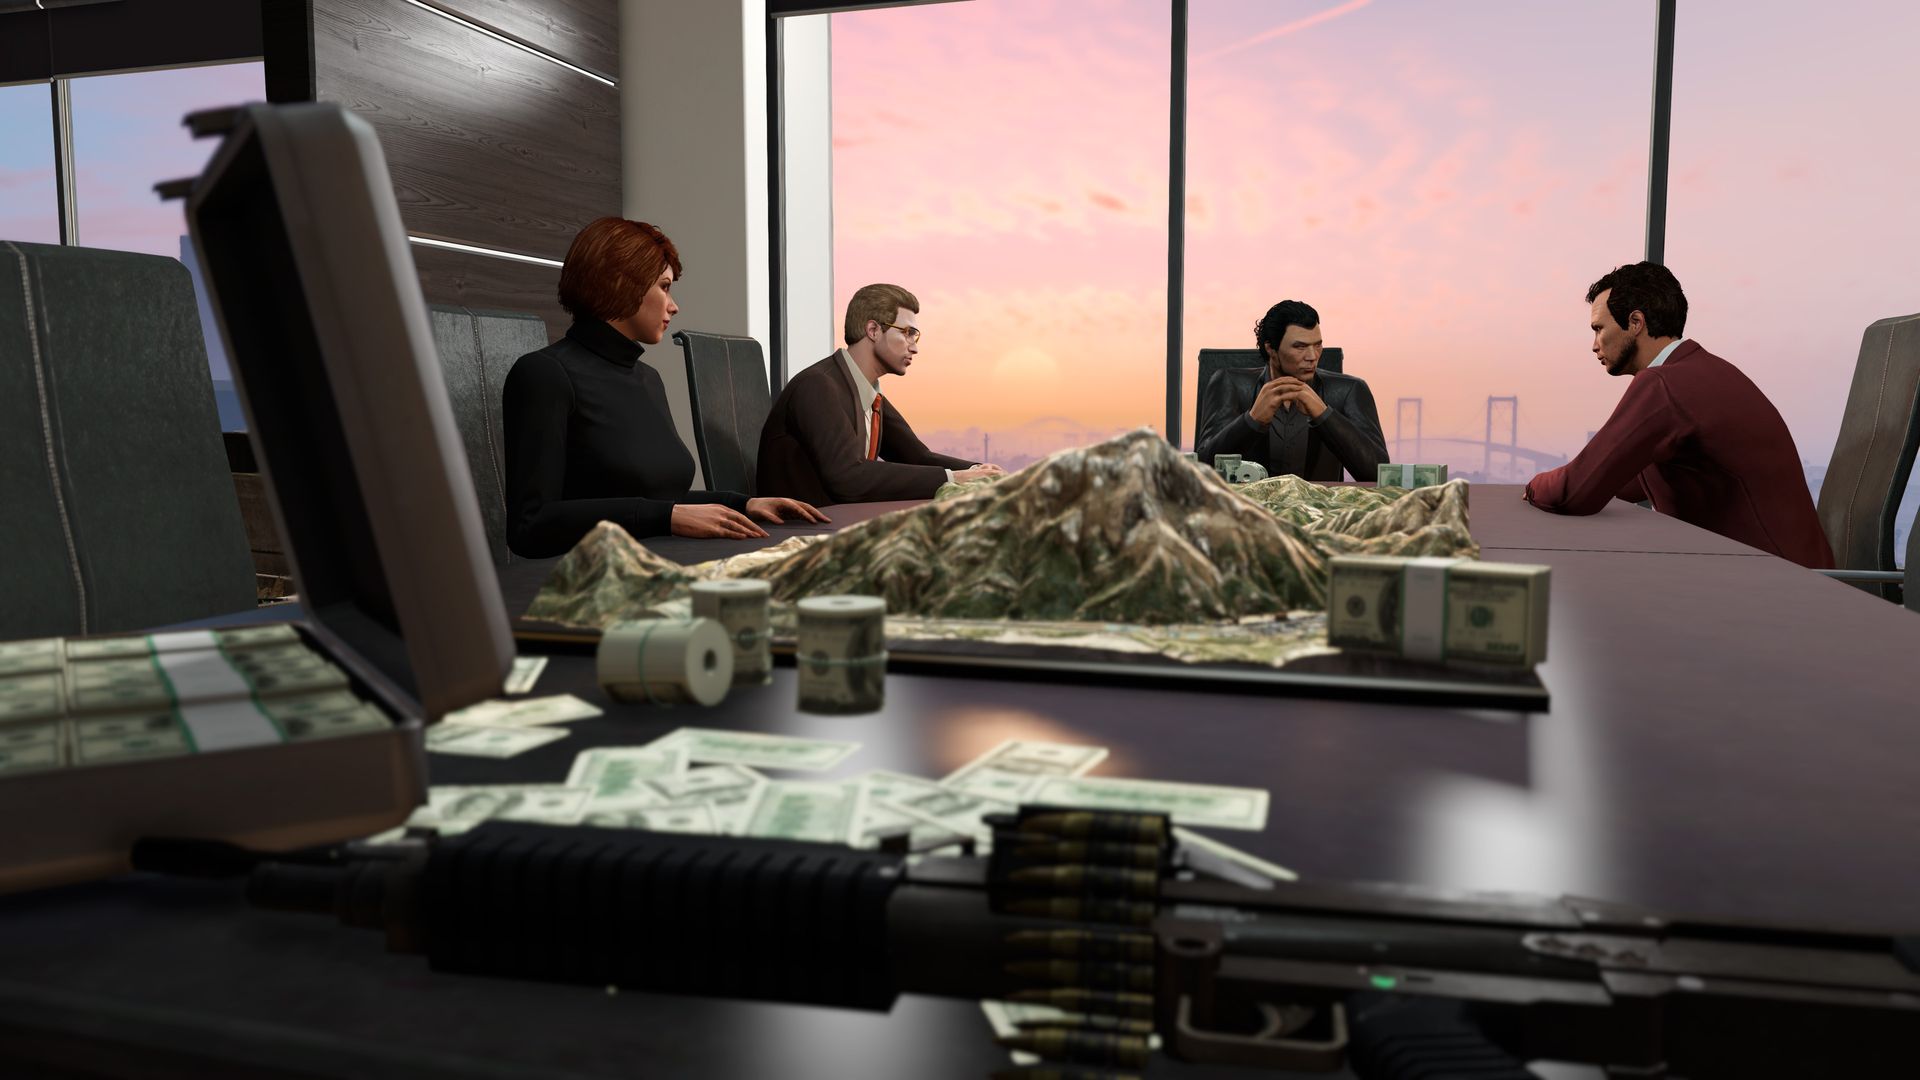 In this article, we are going to be covering how to register as a CEO in GTA 5, so you can take advantage of the in-game content that comes with the title.